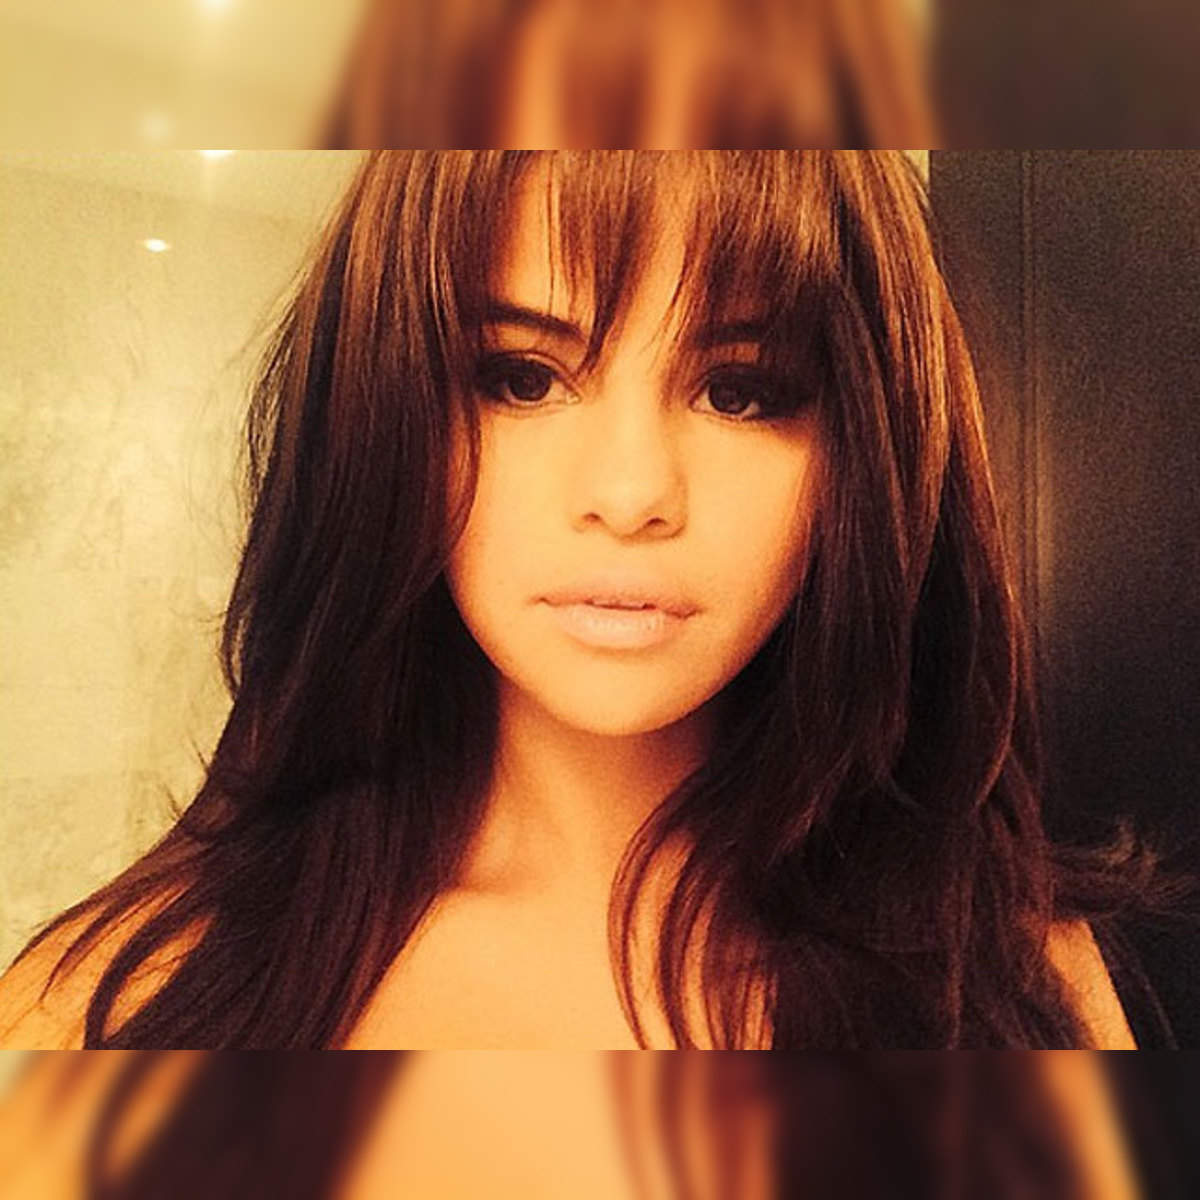 Selena Gomez Debuts Bold New Hairstyle Ahead of the Grammys - Parade